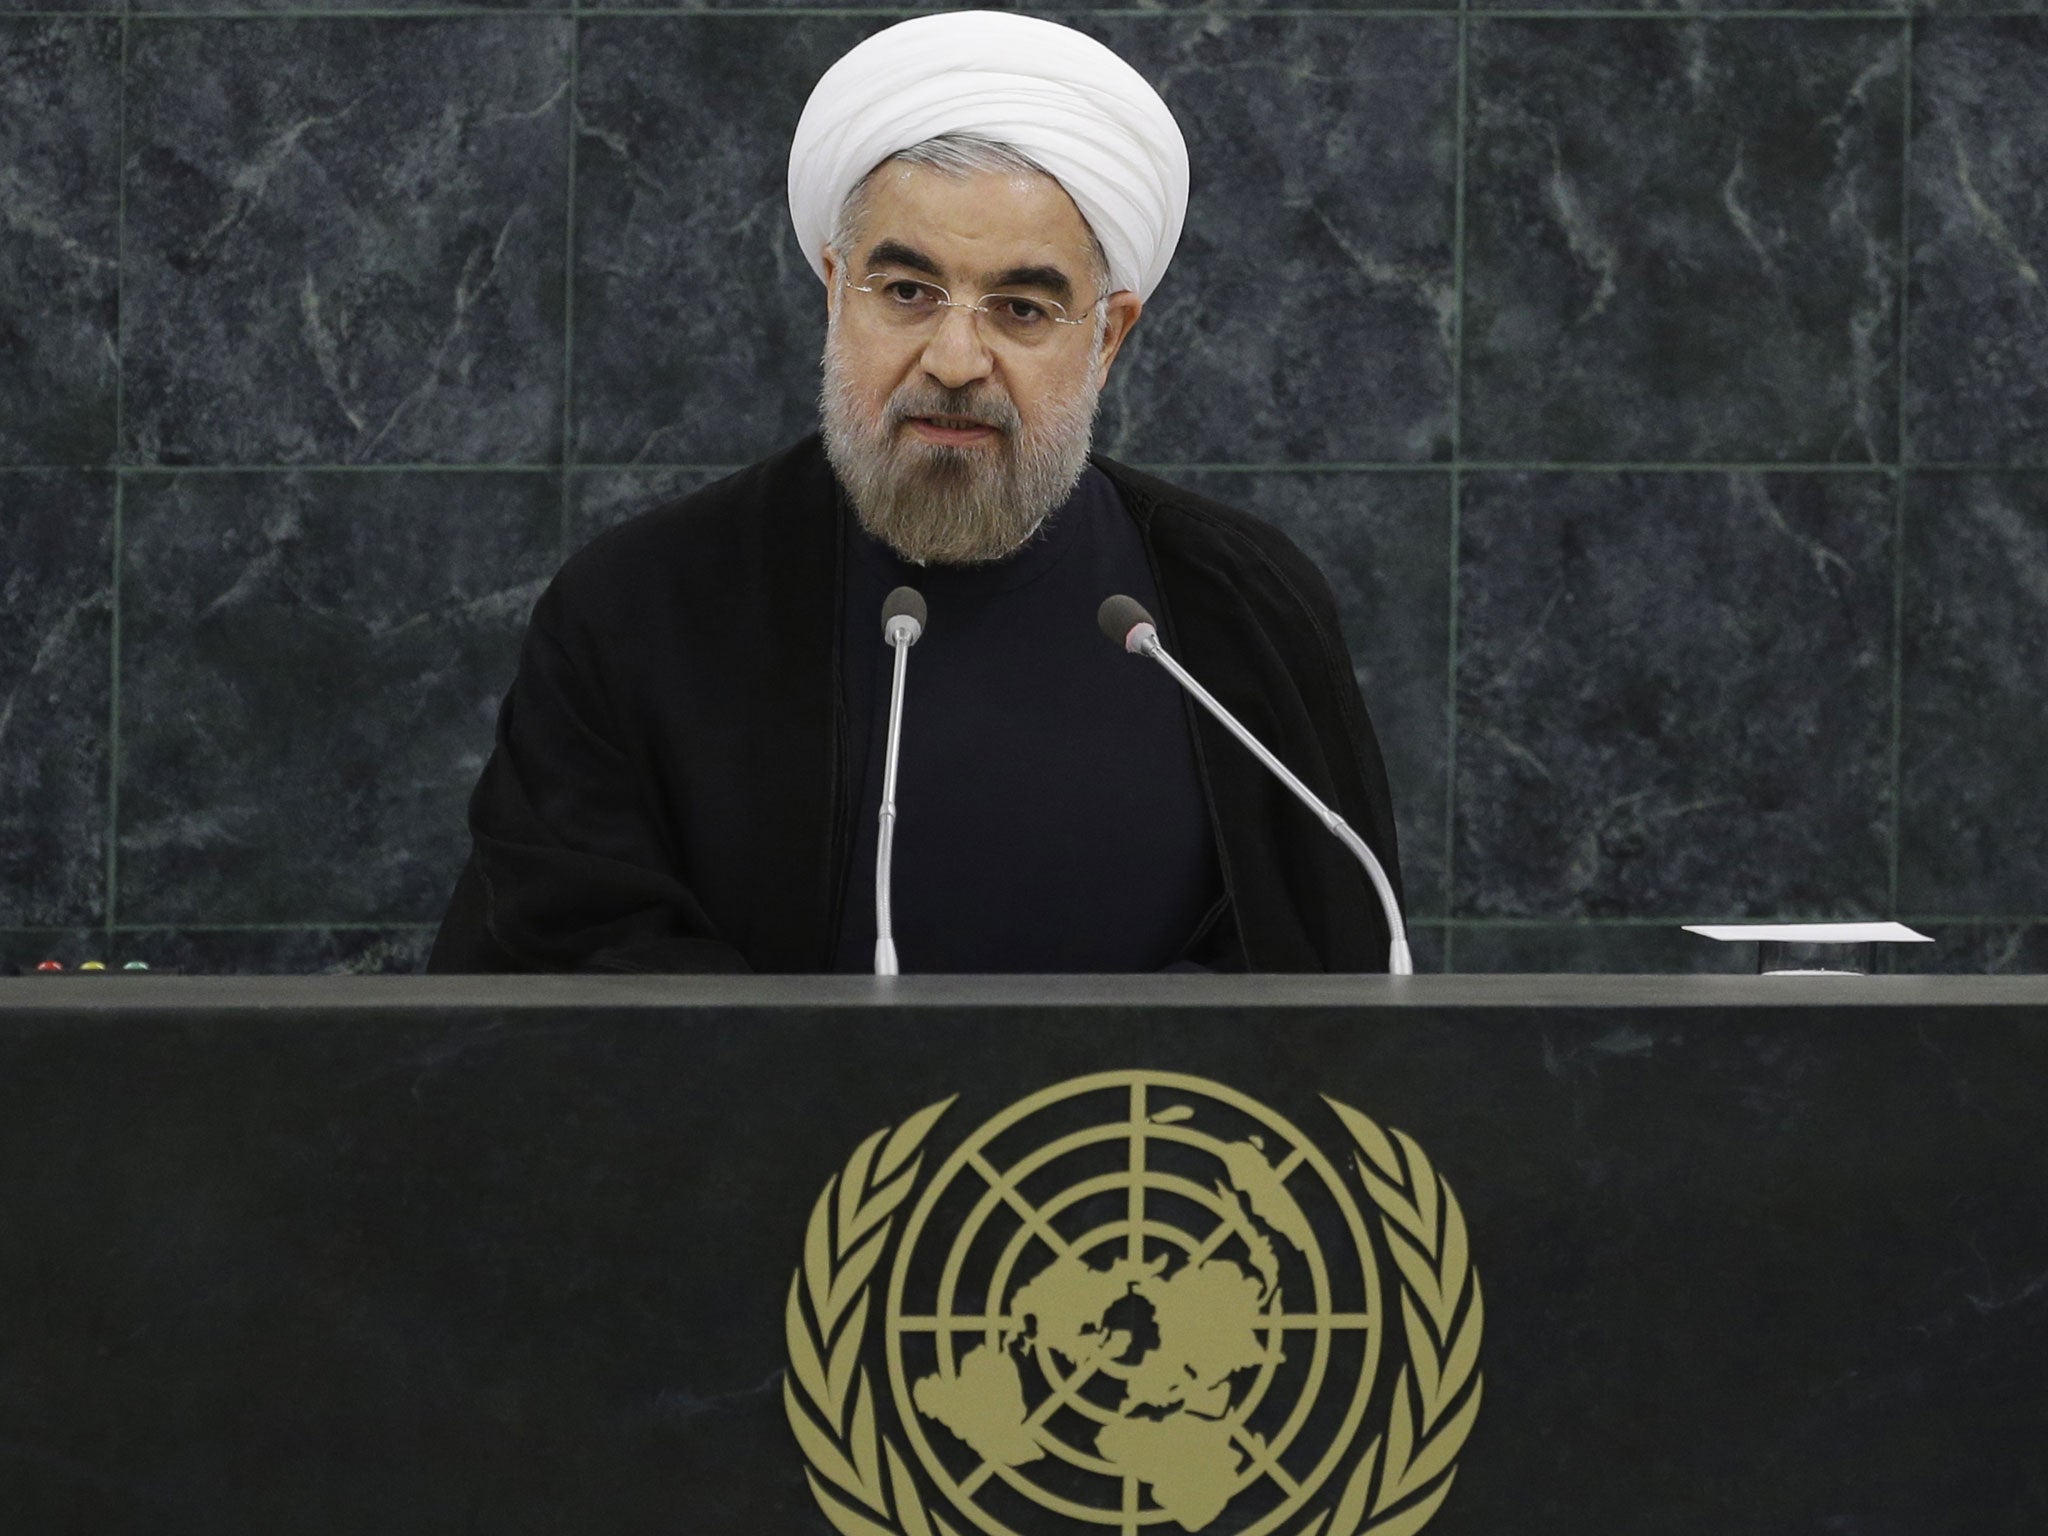 Iranian President, Hassan Rouhani, addresses the UN General Assembly in New York